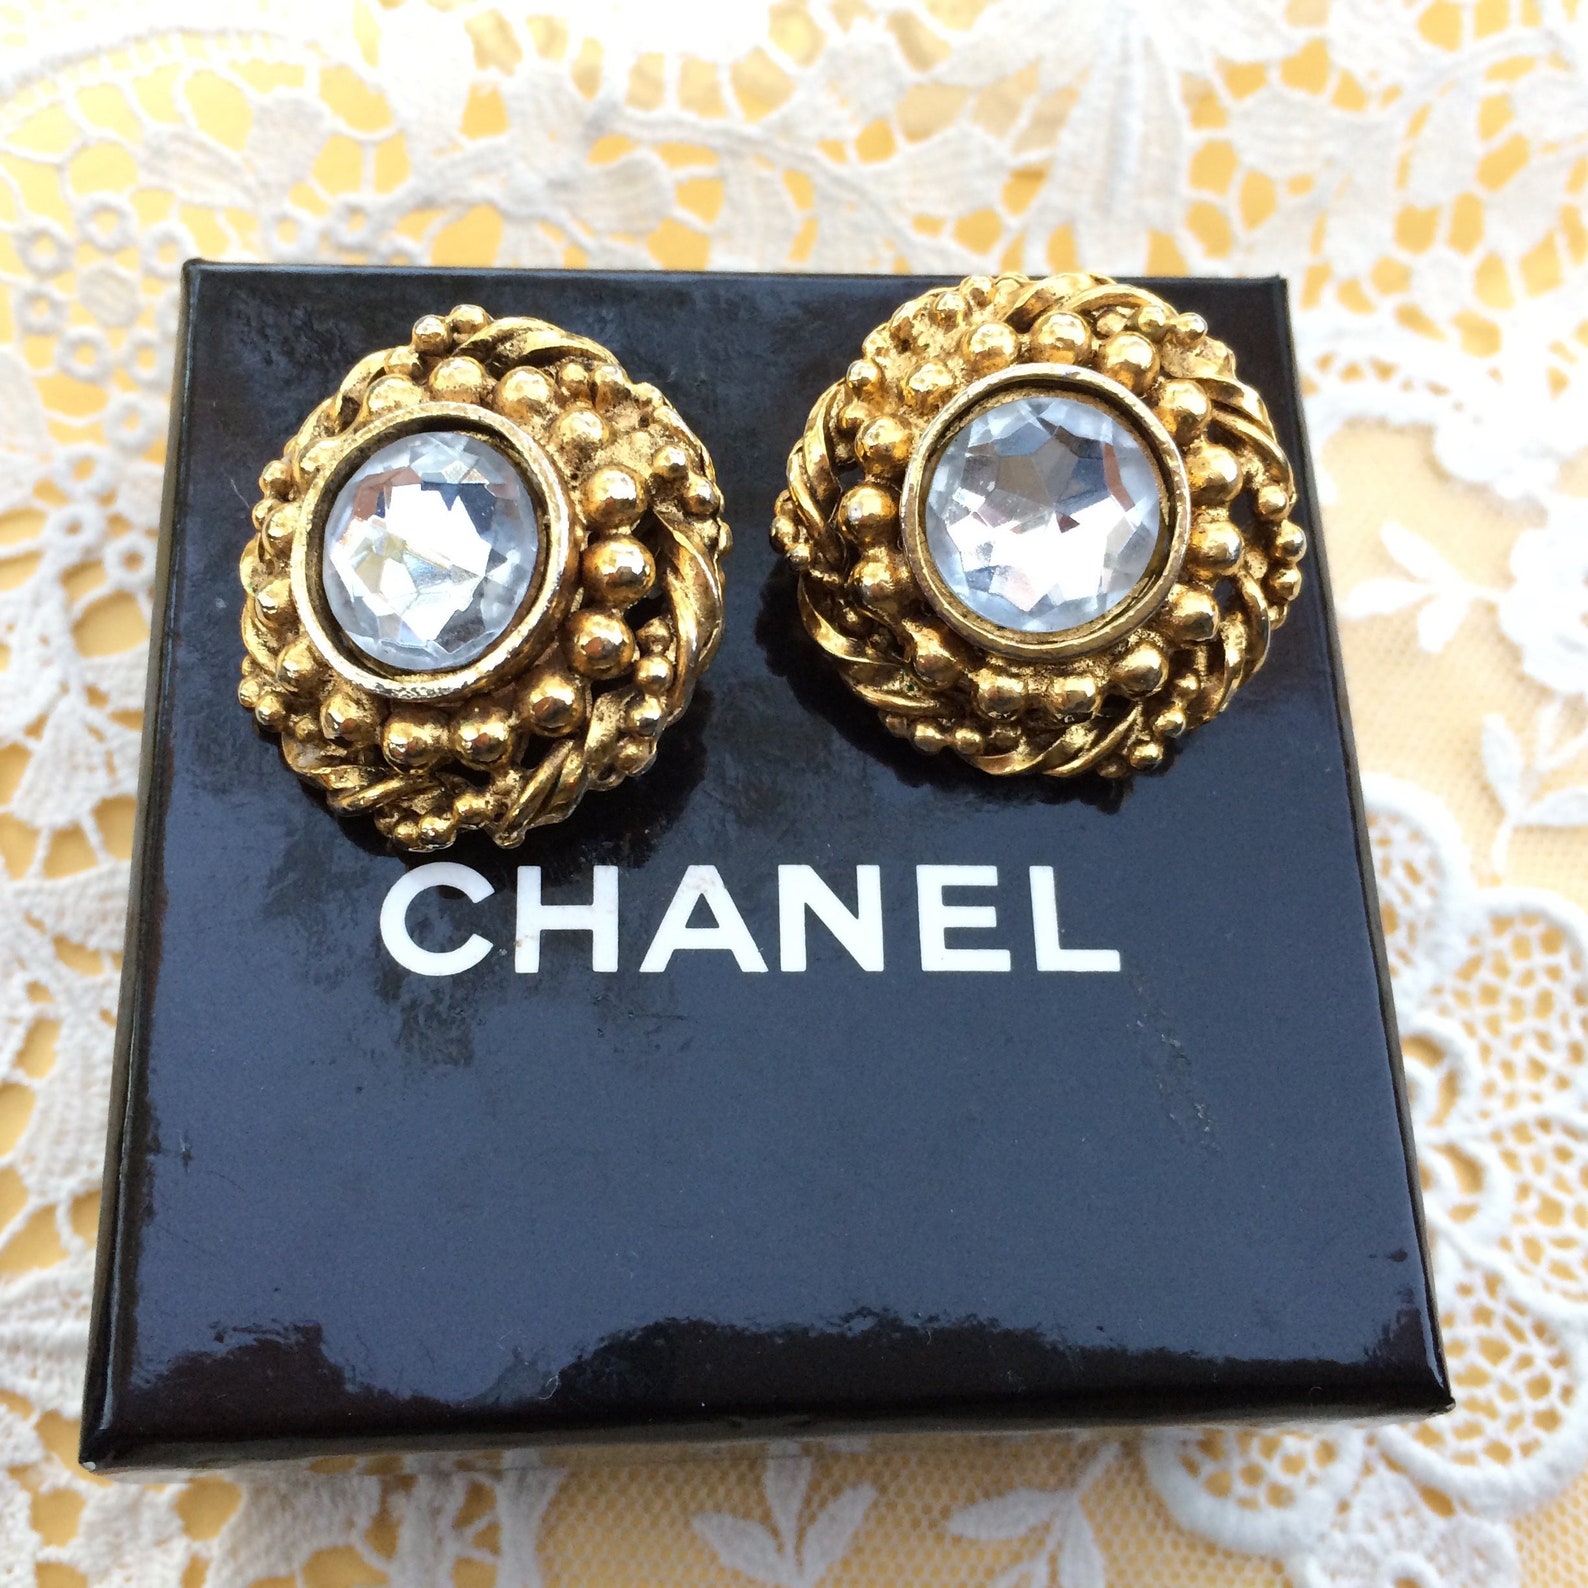 Vintage Chanel earrings Crystals set in gold clip-on Chanel | Etsy